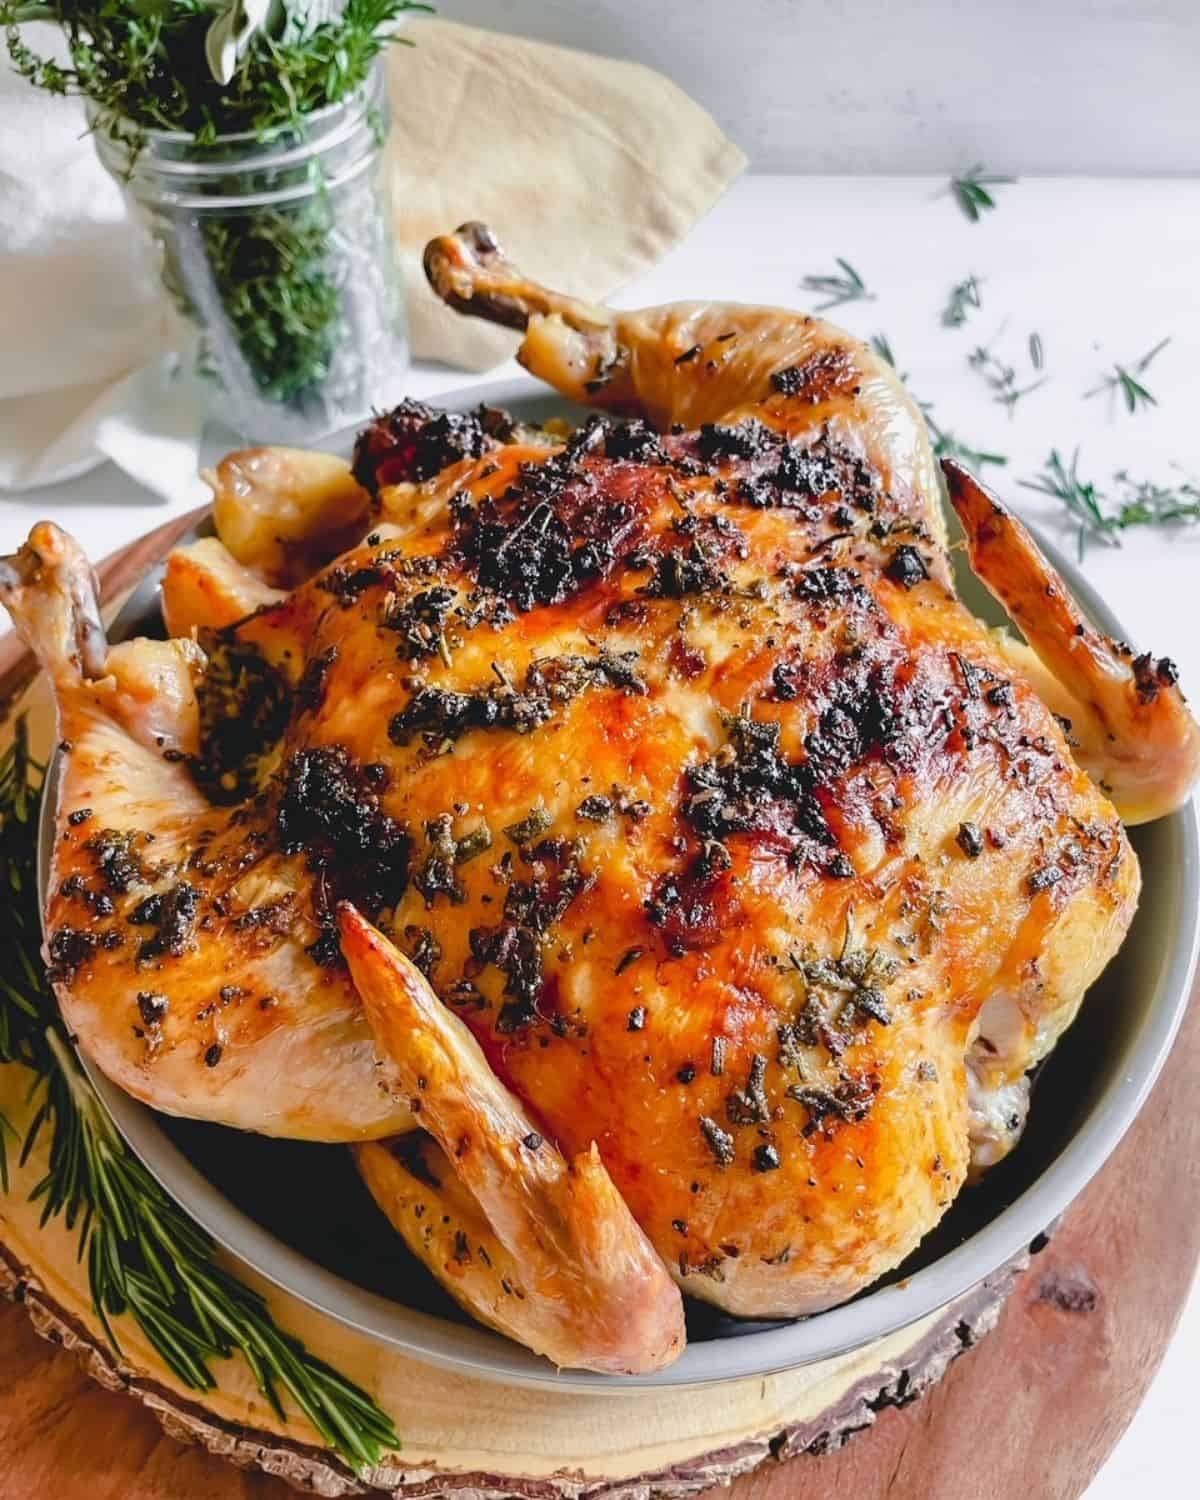 Roasted Chicken with Garlic Herb Butter displayed on a round wooden tray surrounded with fresh herbs